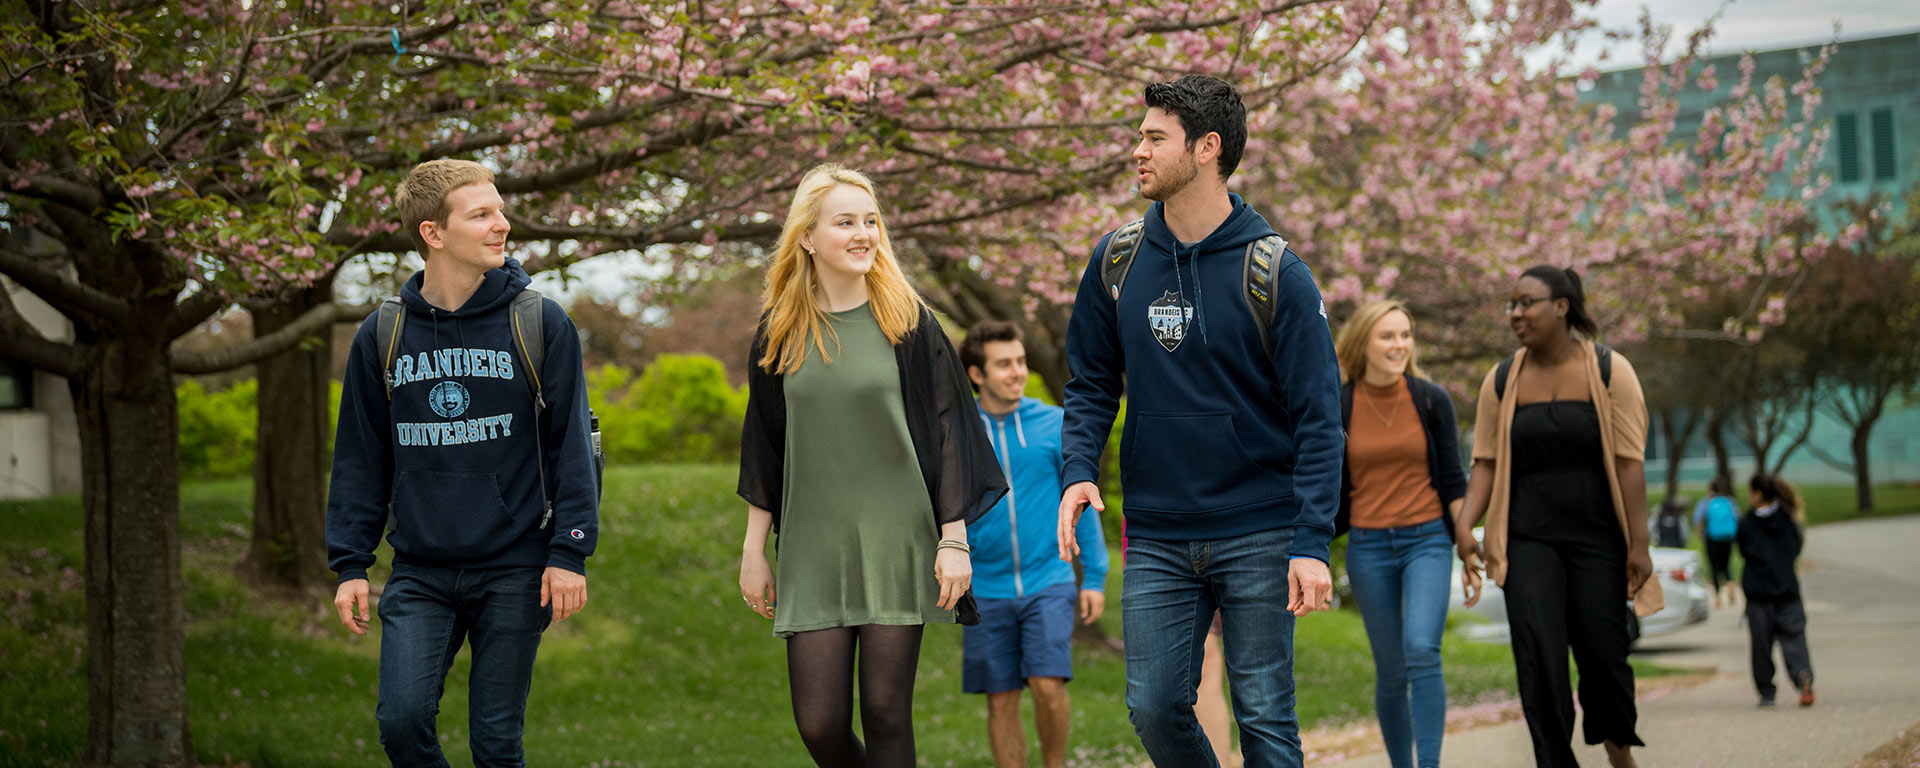 students walking on campus during spring